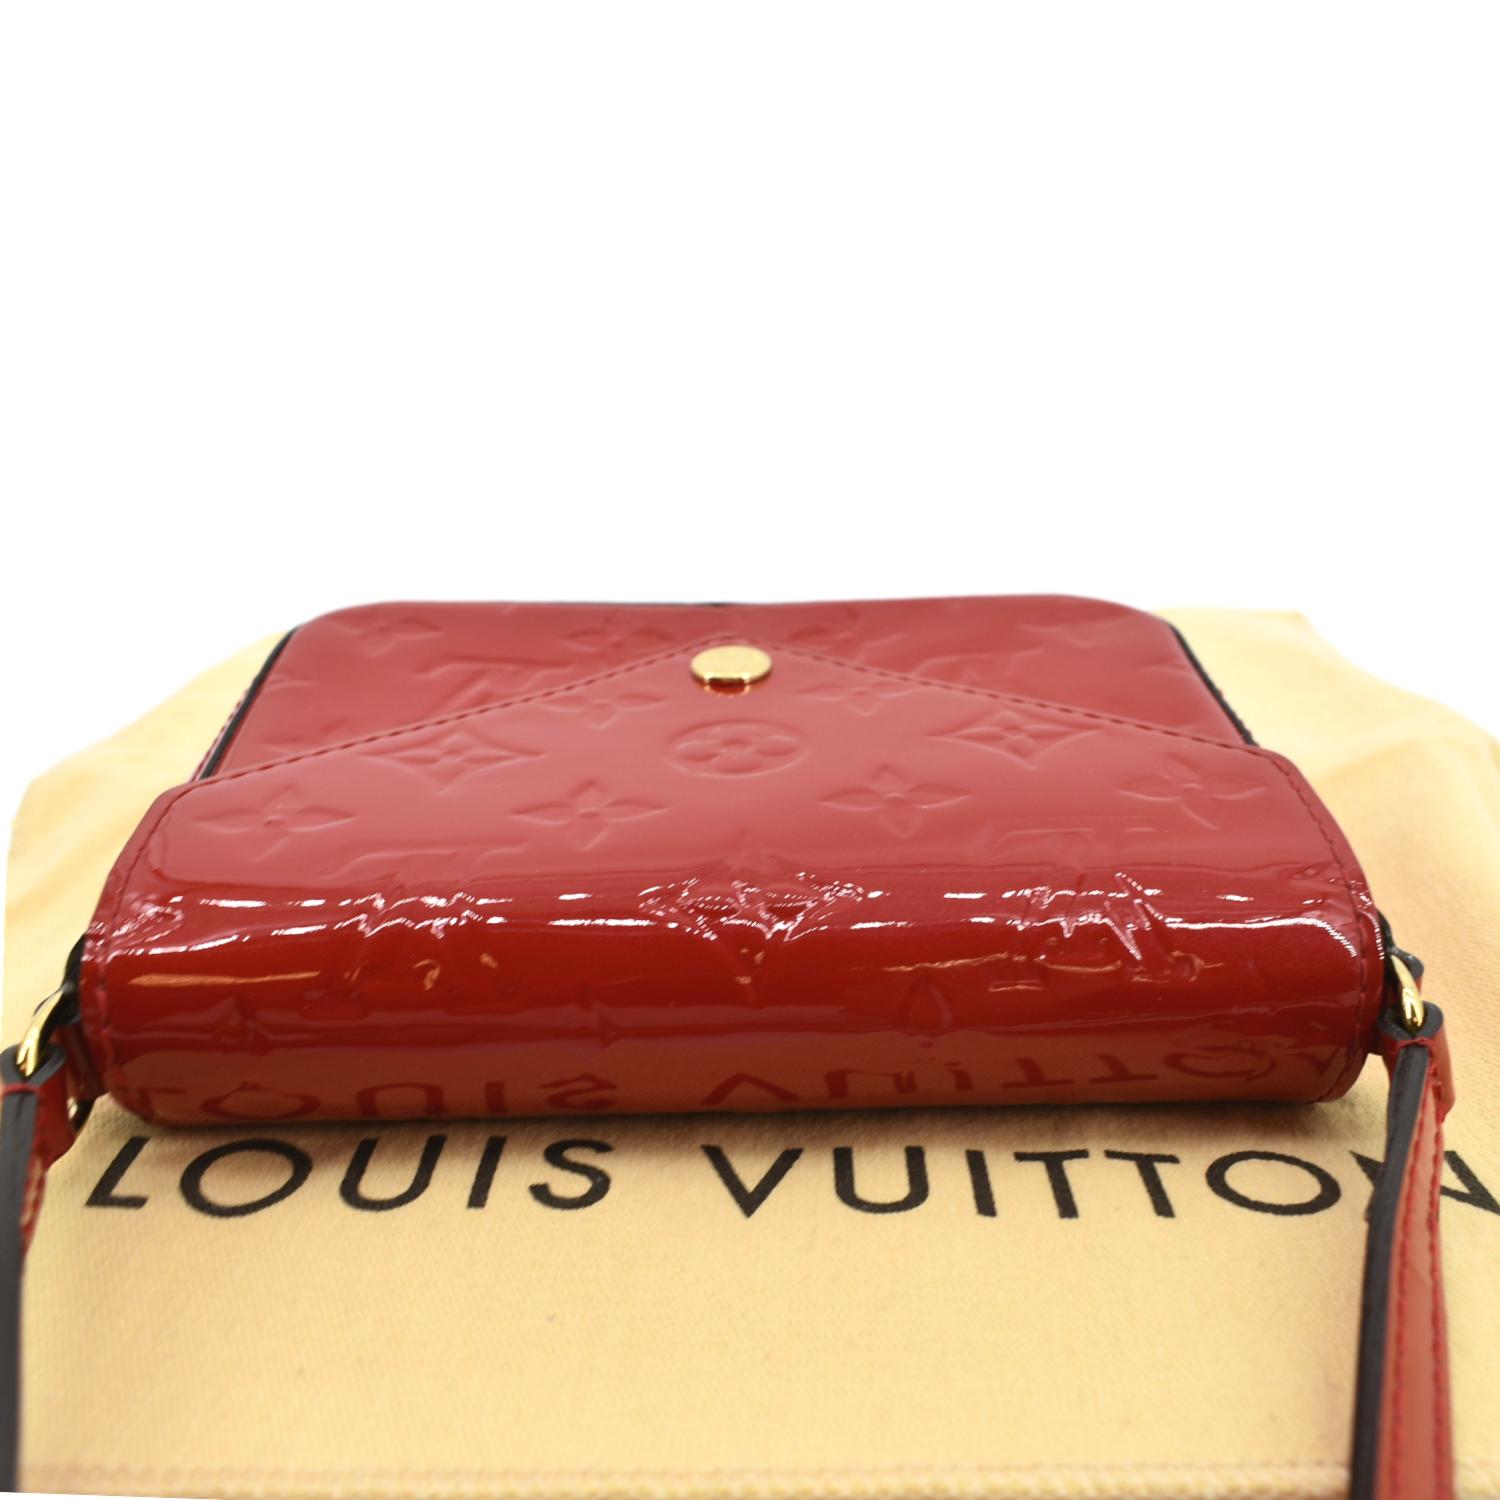 Louis Vuitton red patent leather gold hardware clutch bag year